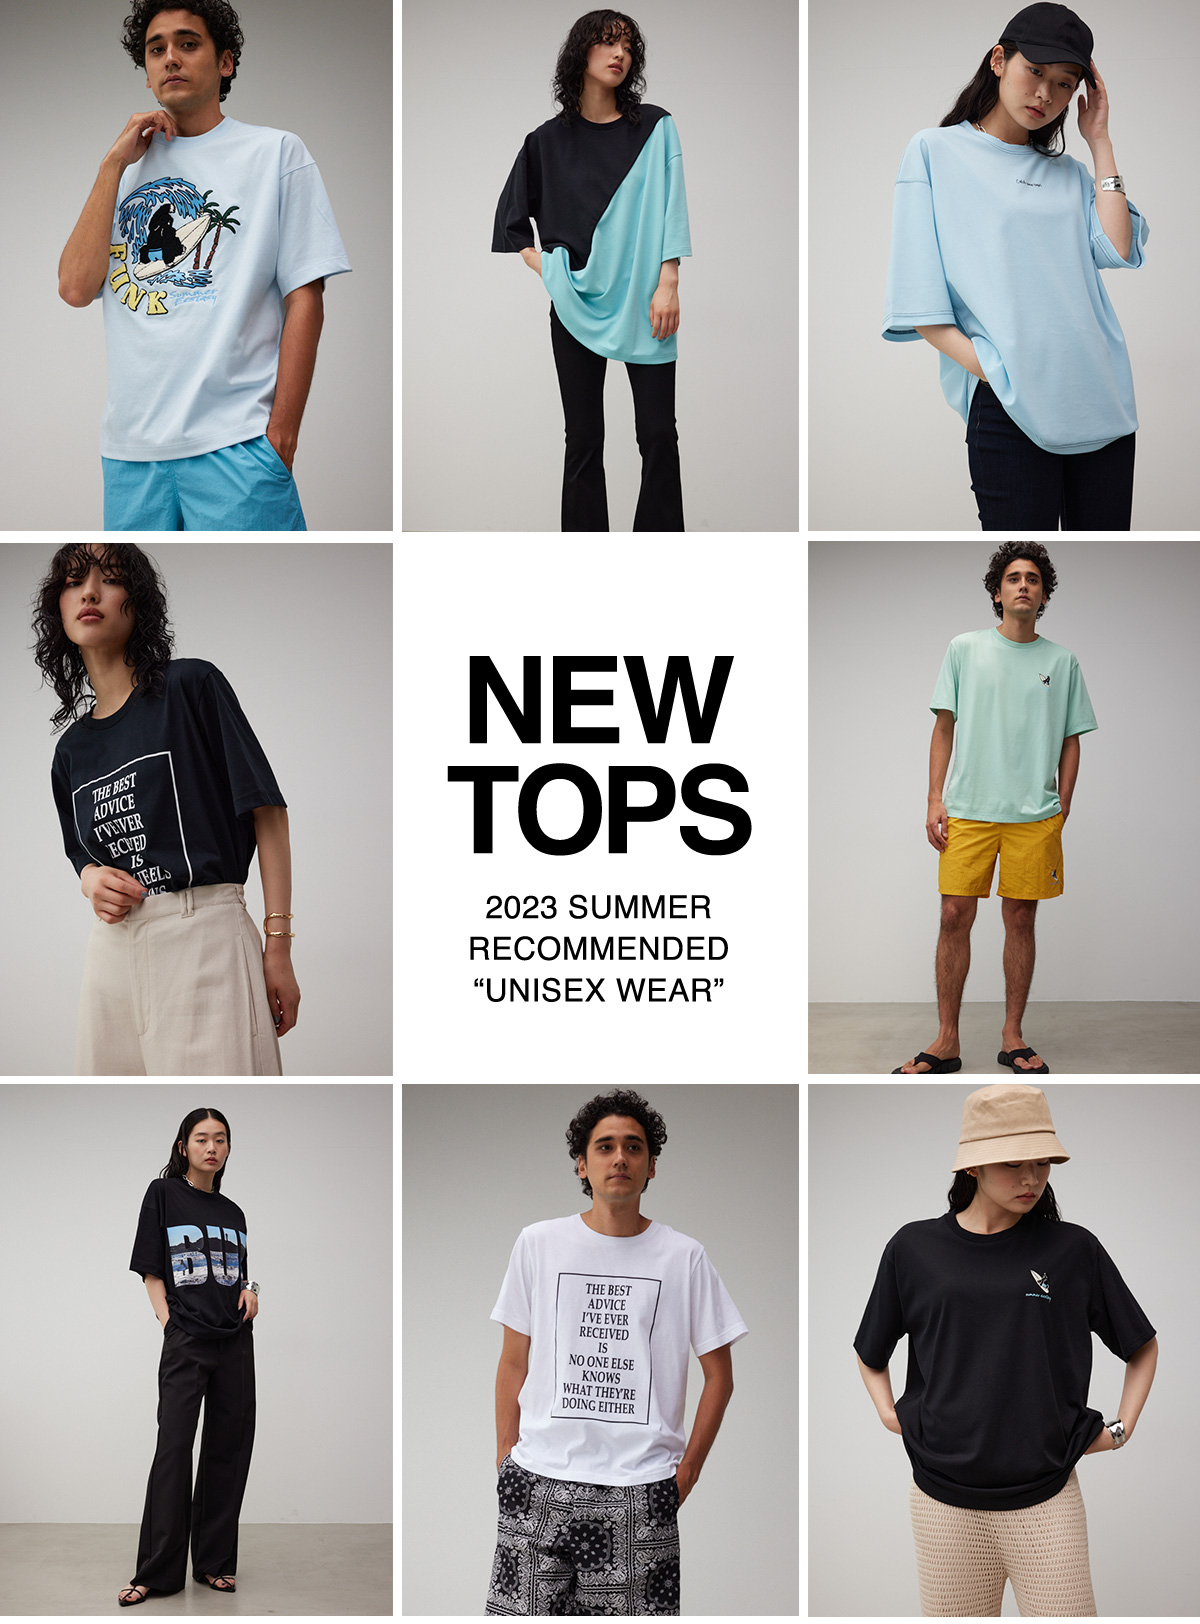 NEW TOPS 2023 SUMMER RECOMMENDED ”UNISEX WEAR”